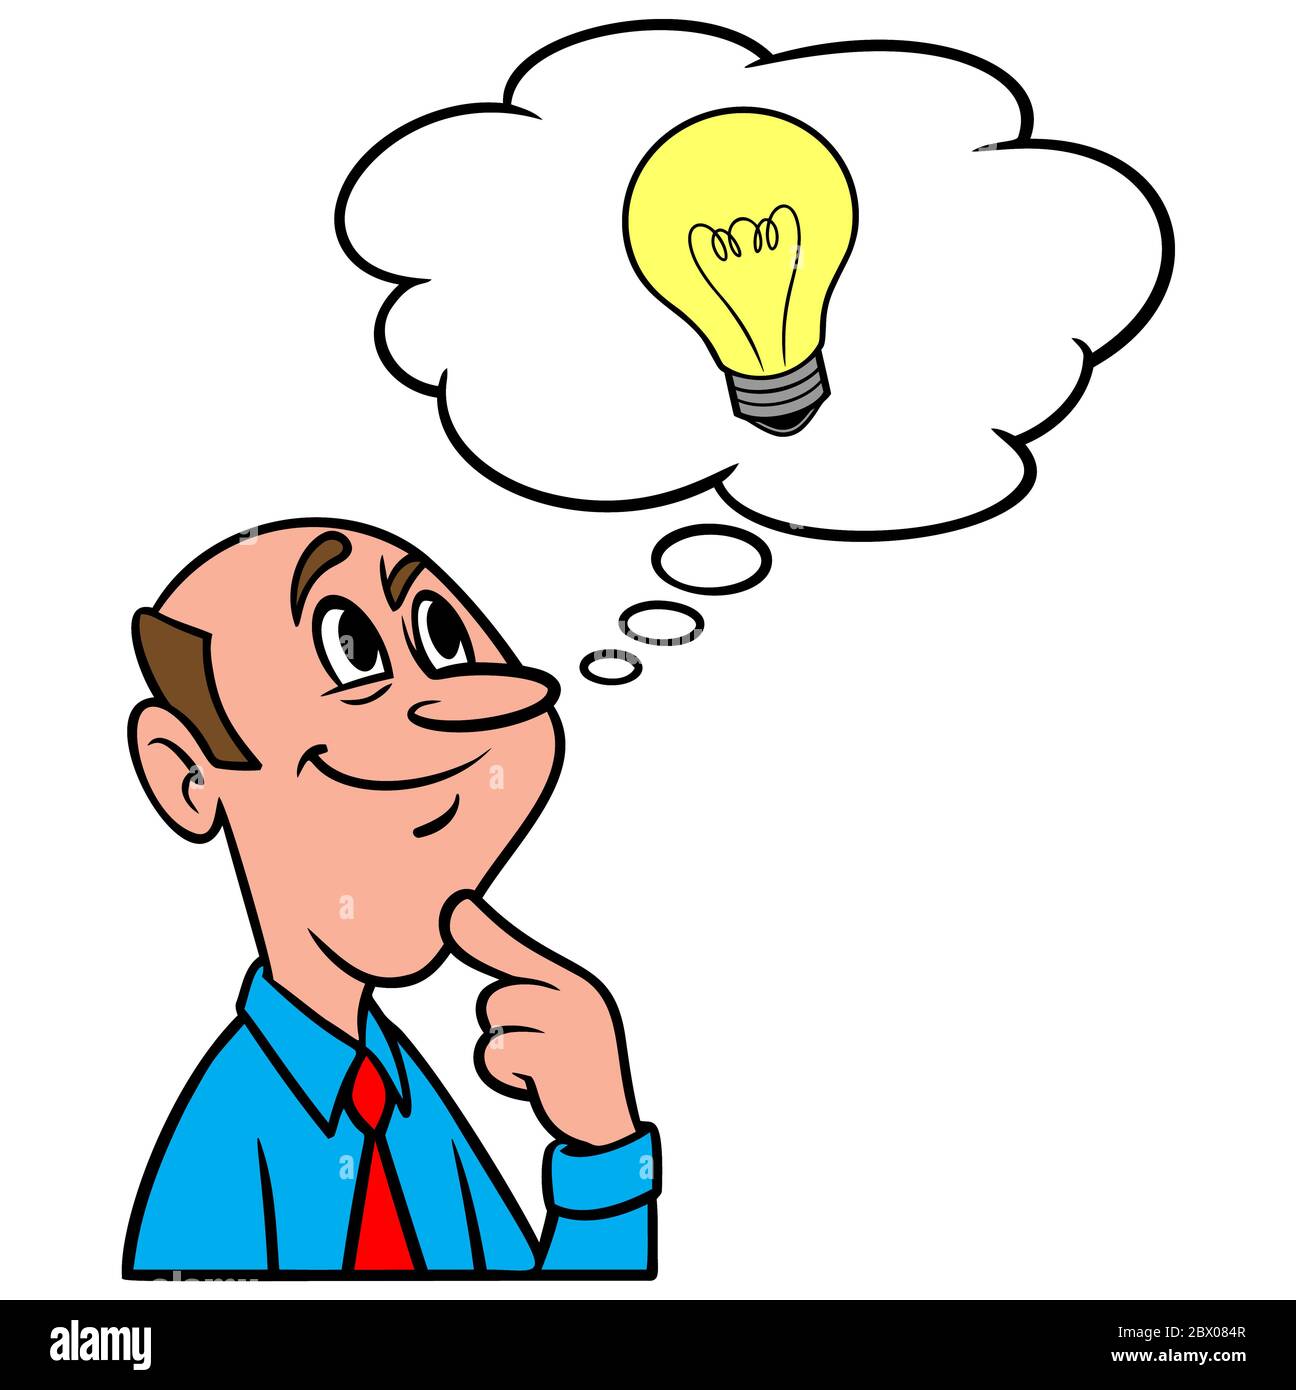 Thinking of an Idea- An Illustration of a person Thinking of an Idea. Stock Vector